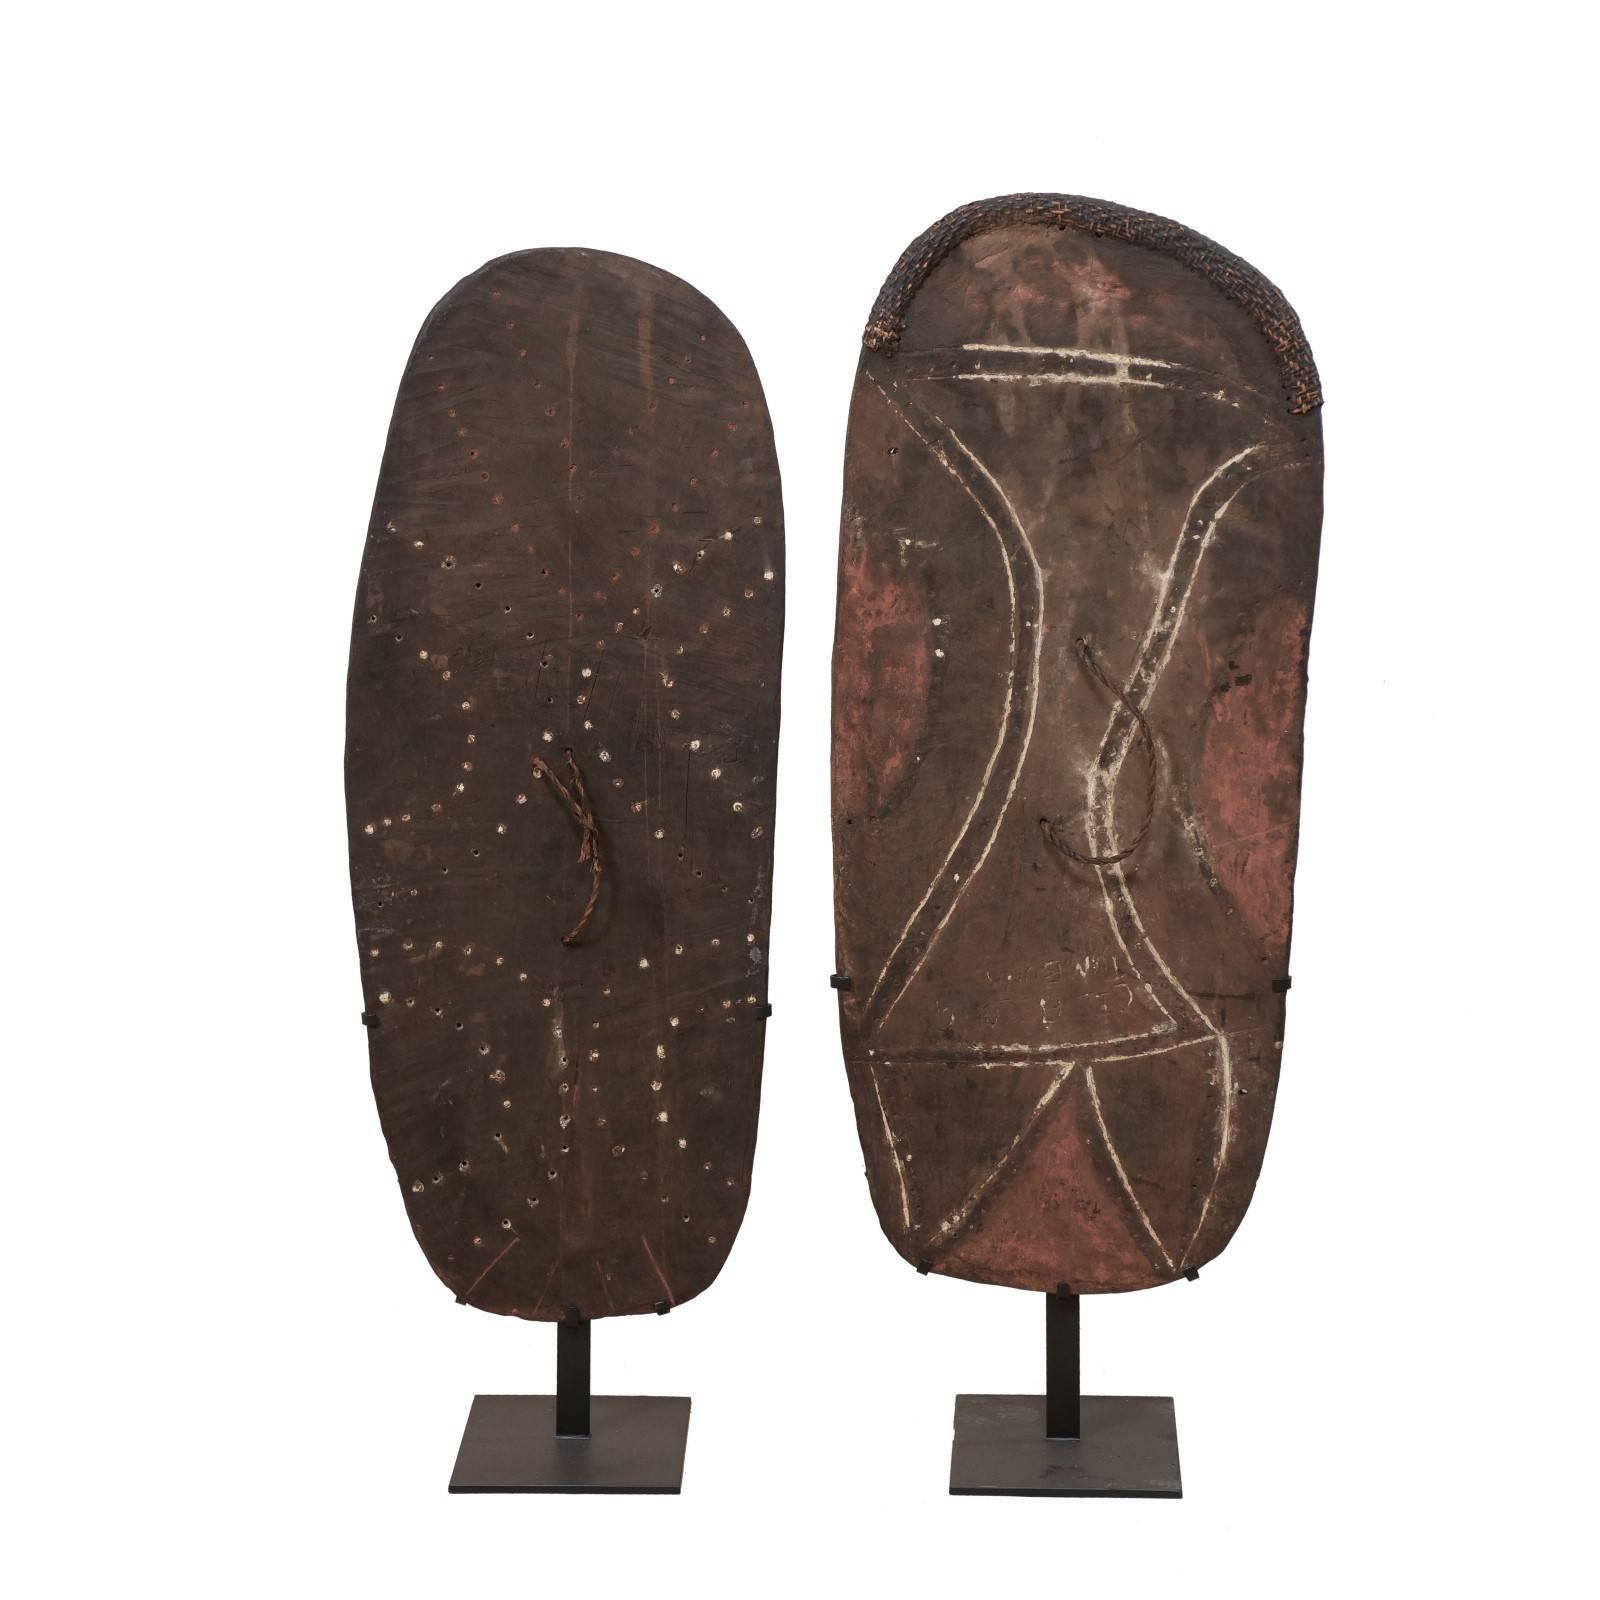 Pair of Mendi Carved-Wood War Shields from Papua New Guinea on Custom Stands